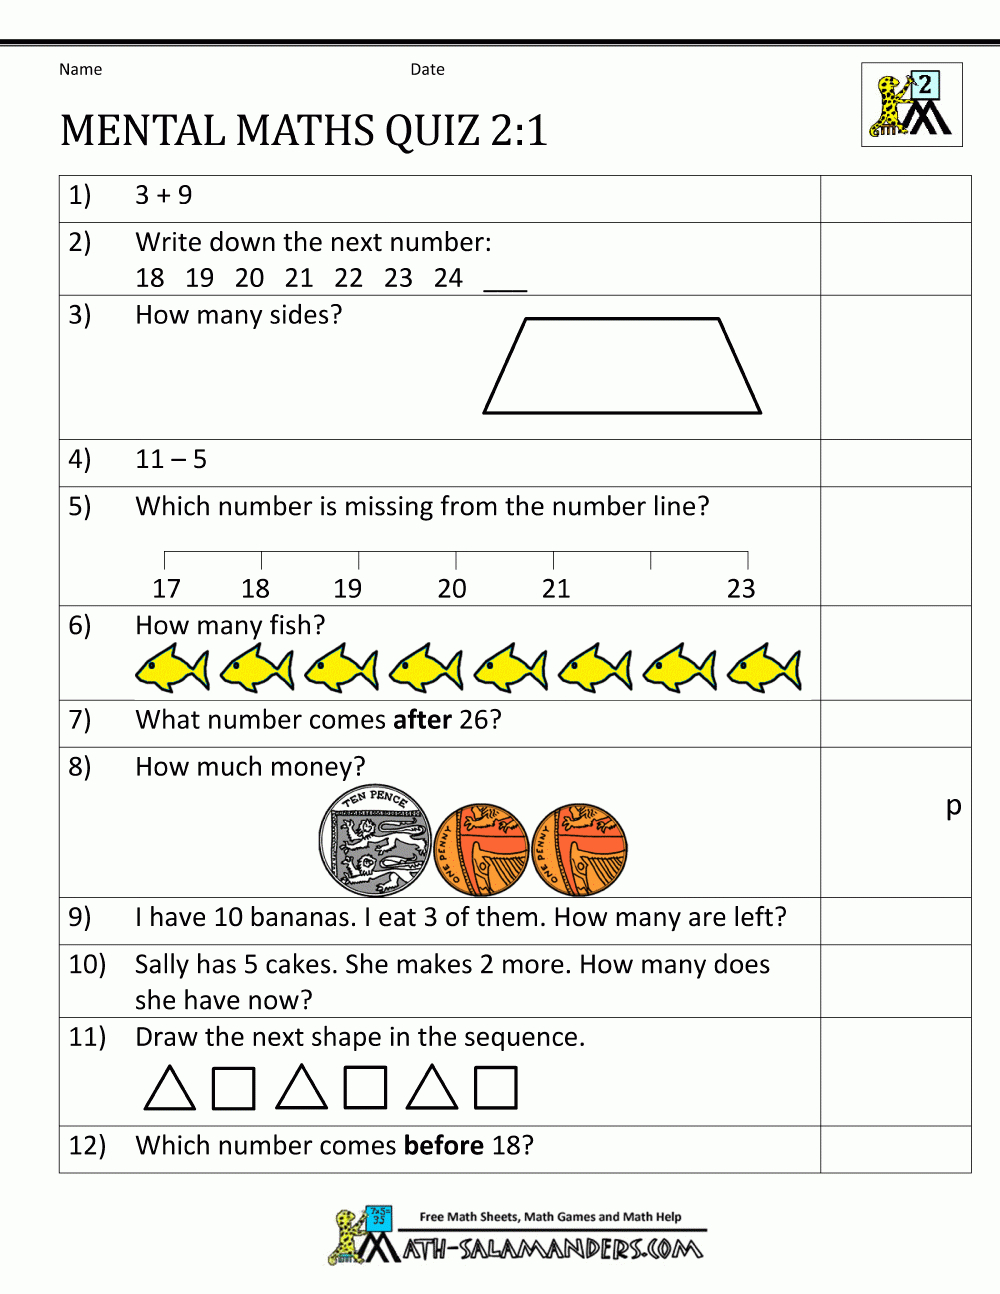 Clock Worksheet Quarter Past And Quarter To Key Stage 1 Maths Printable Worksheets Lexia s